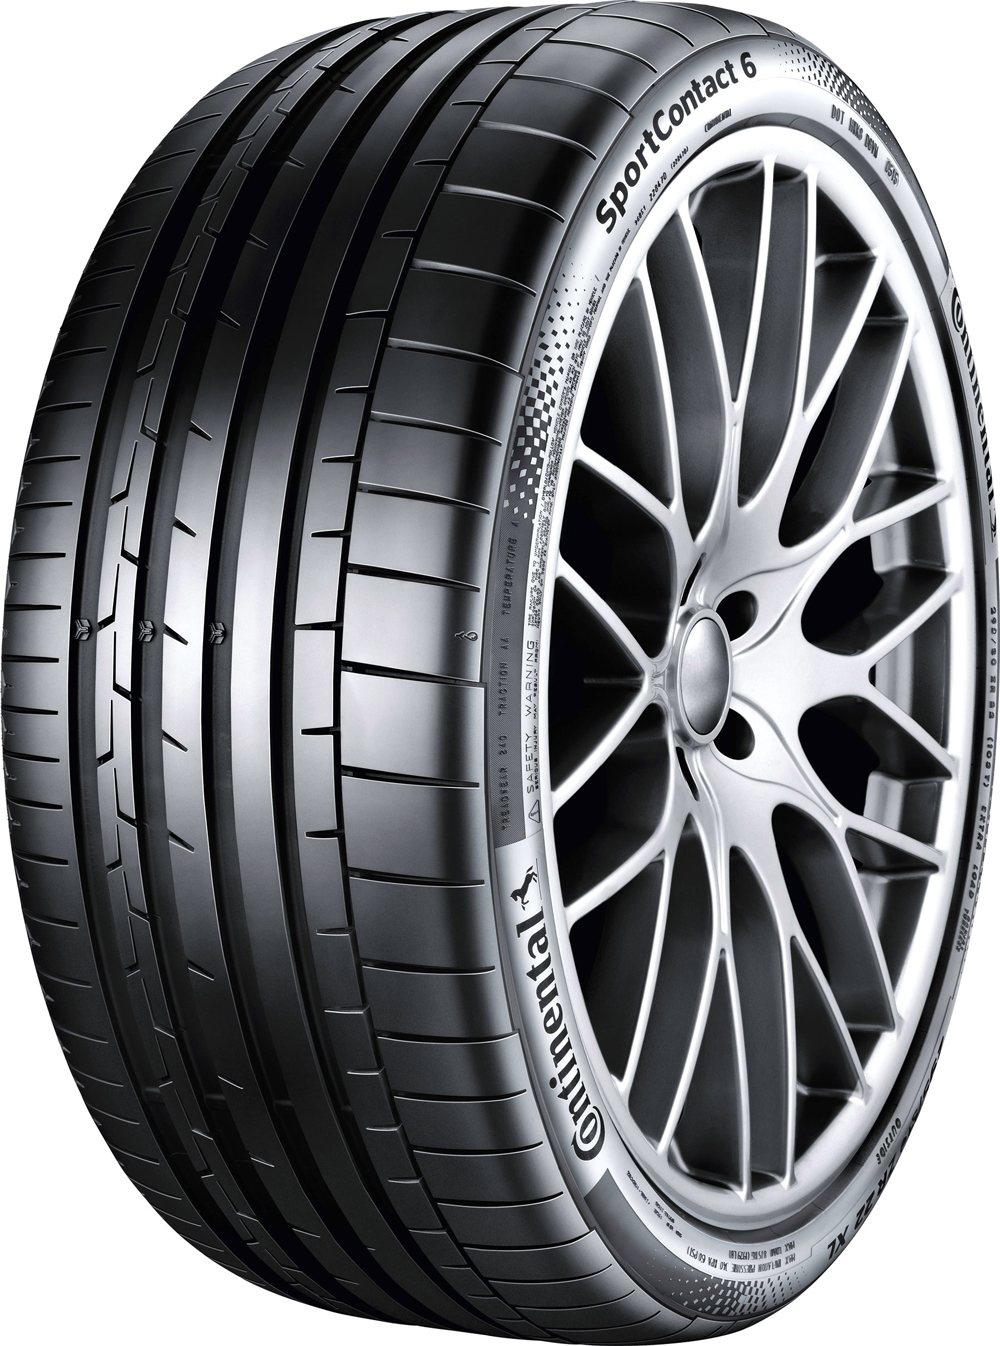 Anvelope auto CONTINENTAL CSC6MOSIL MERCEDES 315/40 R21 111Y